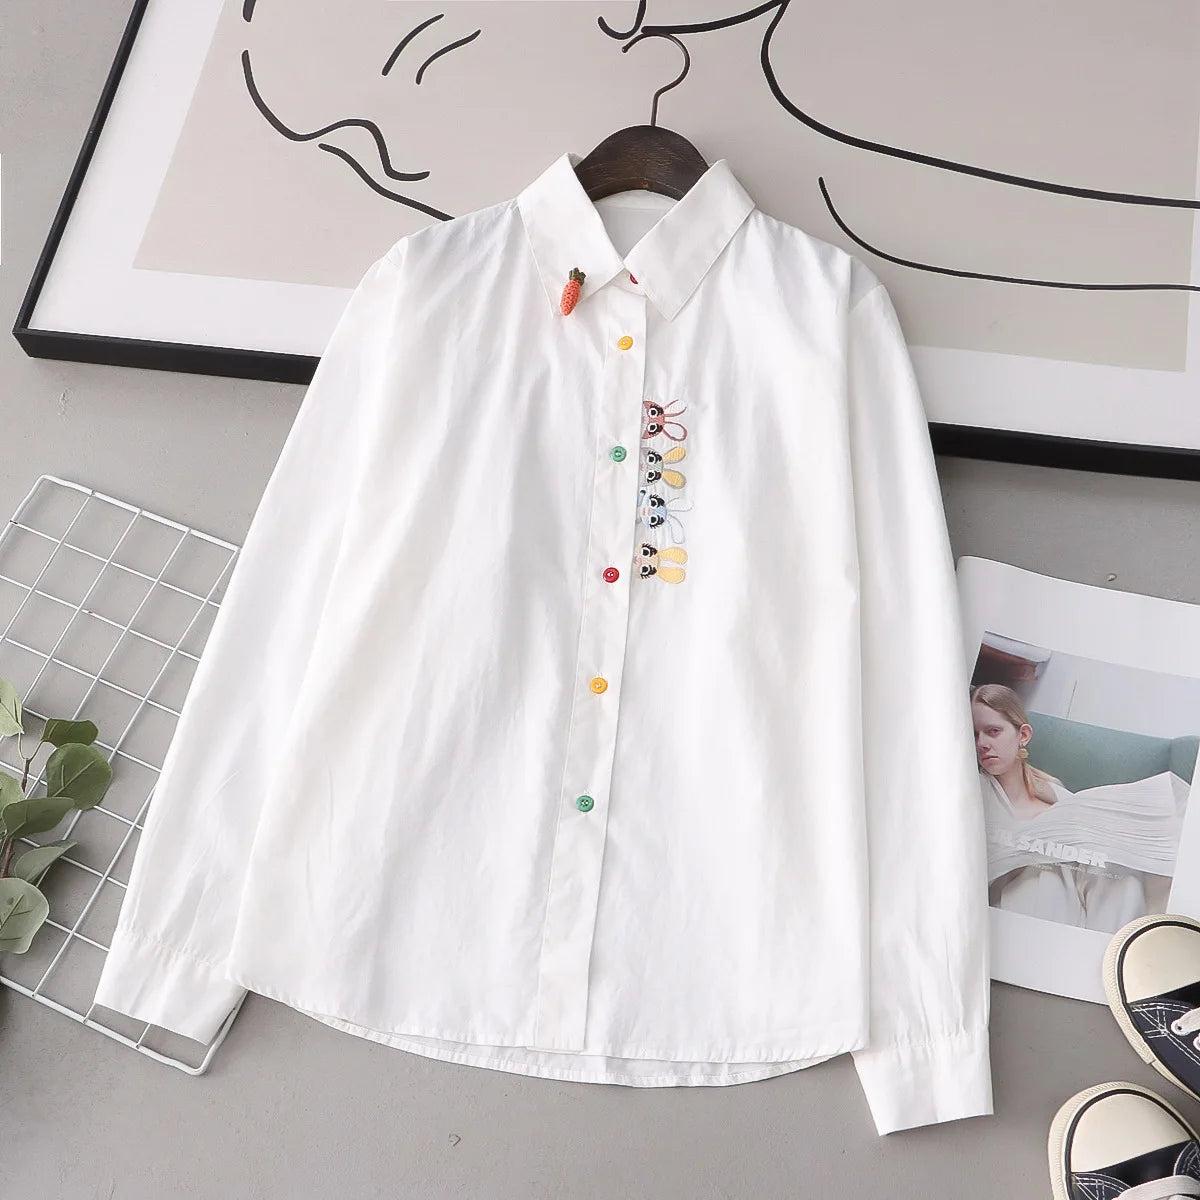 Cotton White Shirts for woman, Cute Embroidery, Rabbit Tops, Turn Down Collar, Button Long Sleeve Straight Blouse KilyClothing